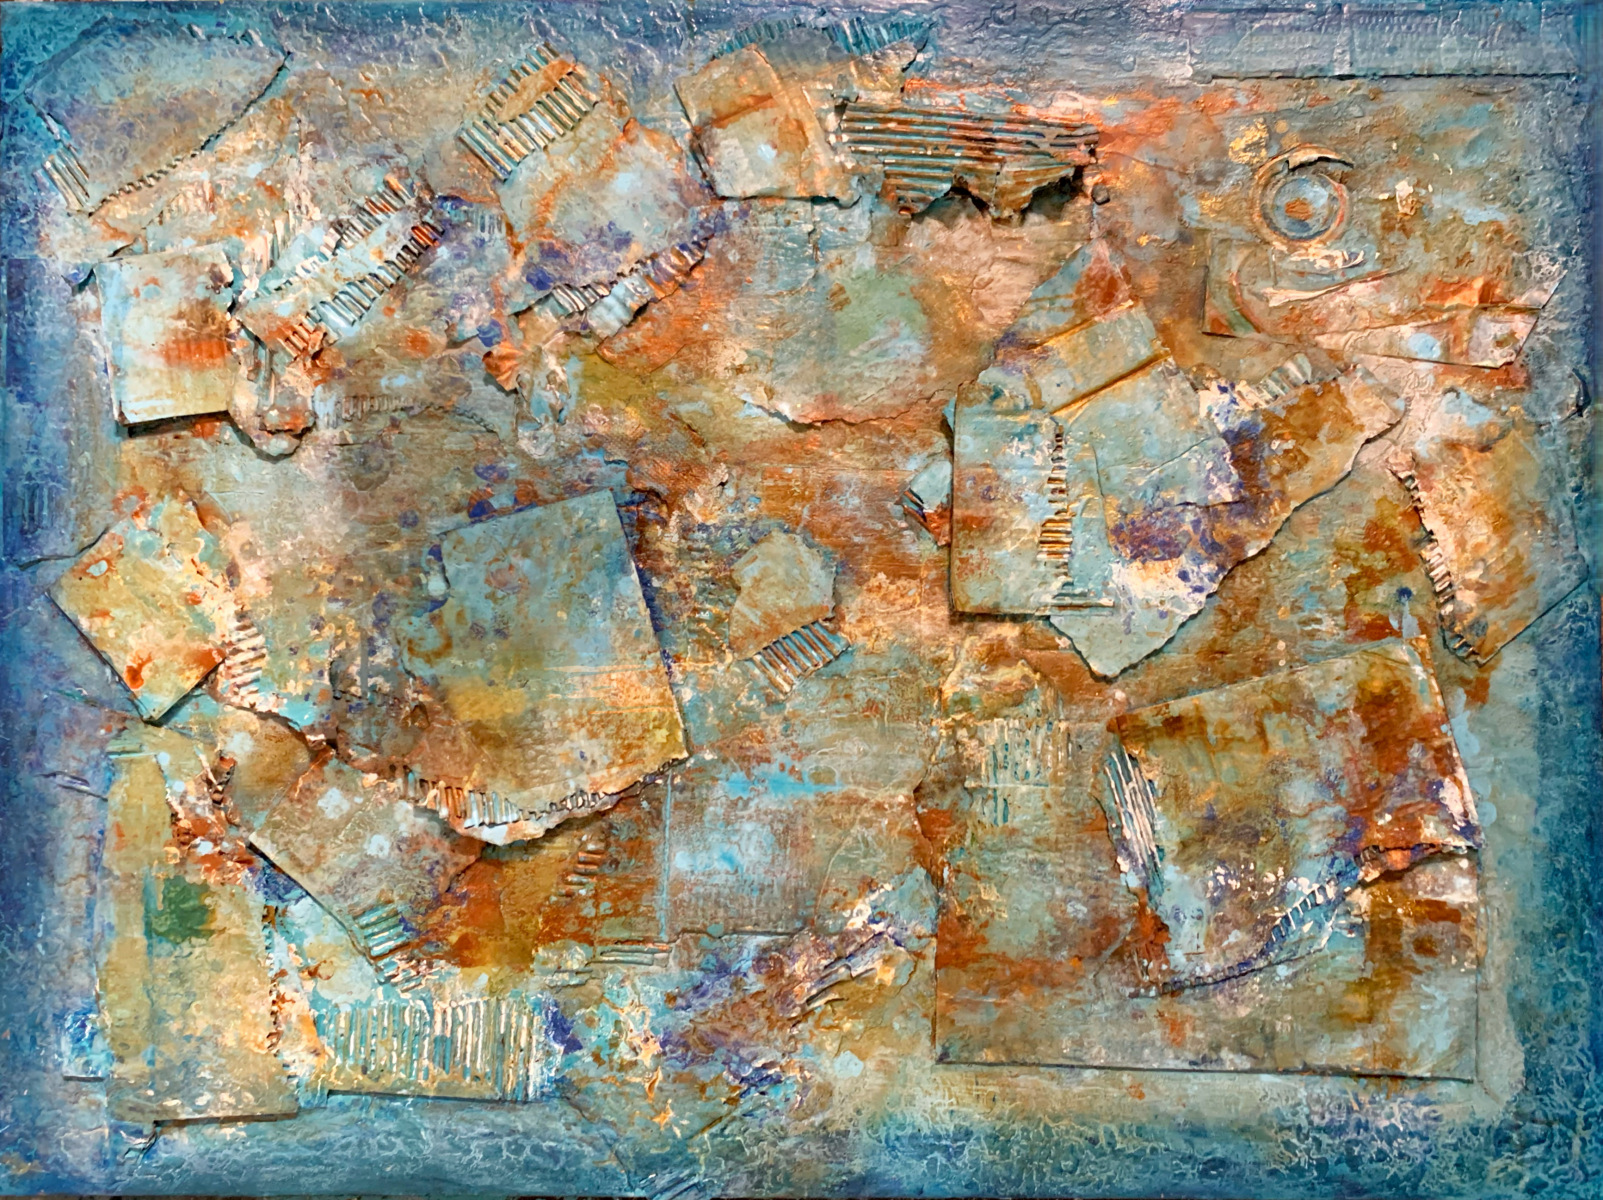 "Mineral deposits" 48x36h" mixed media recycled objects and paint on canvas